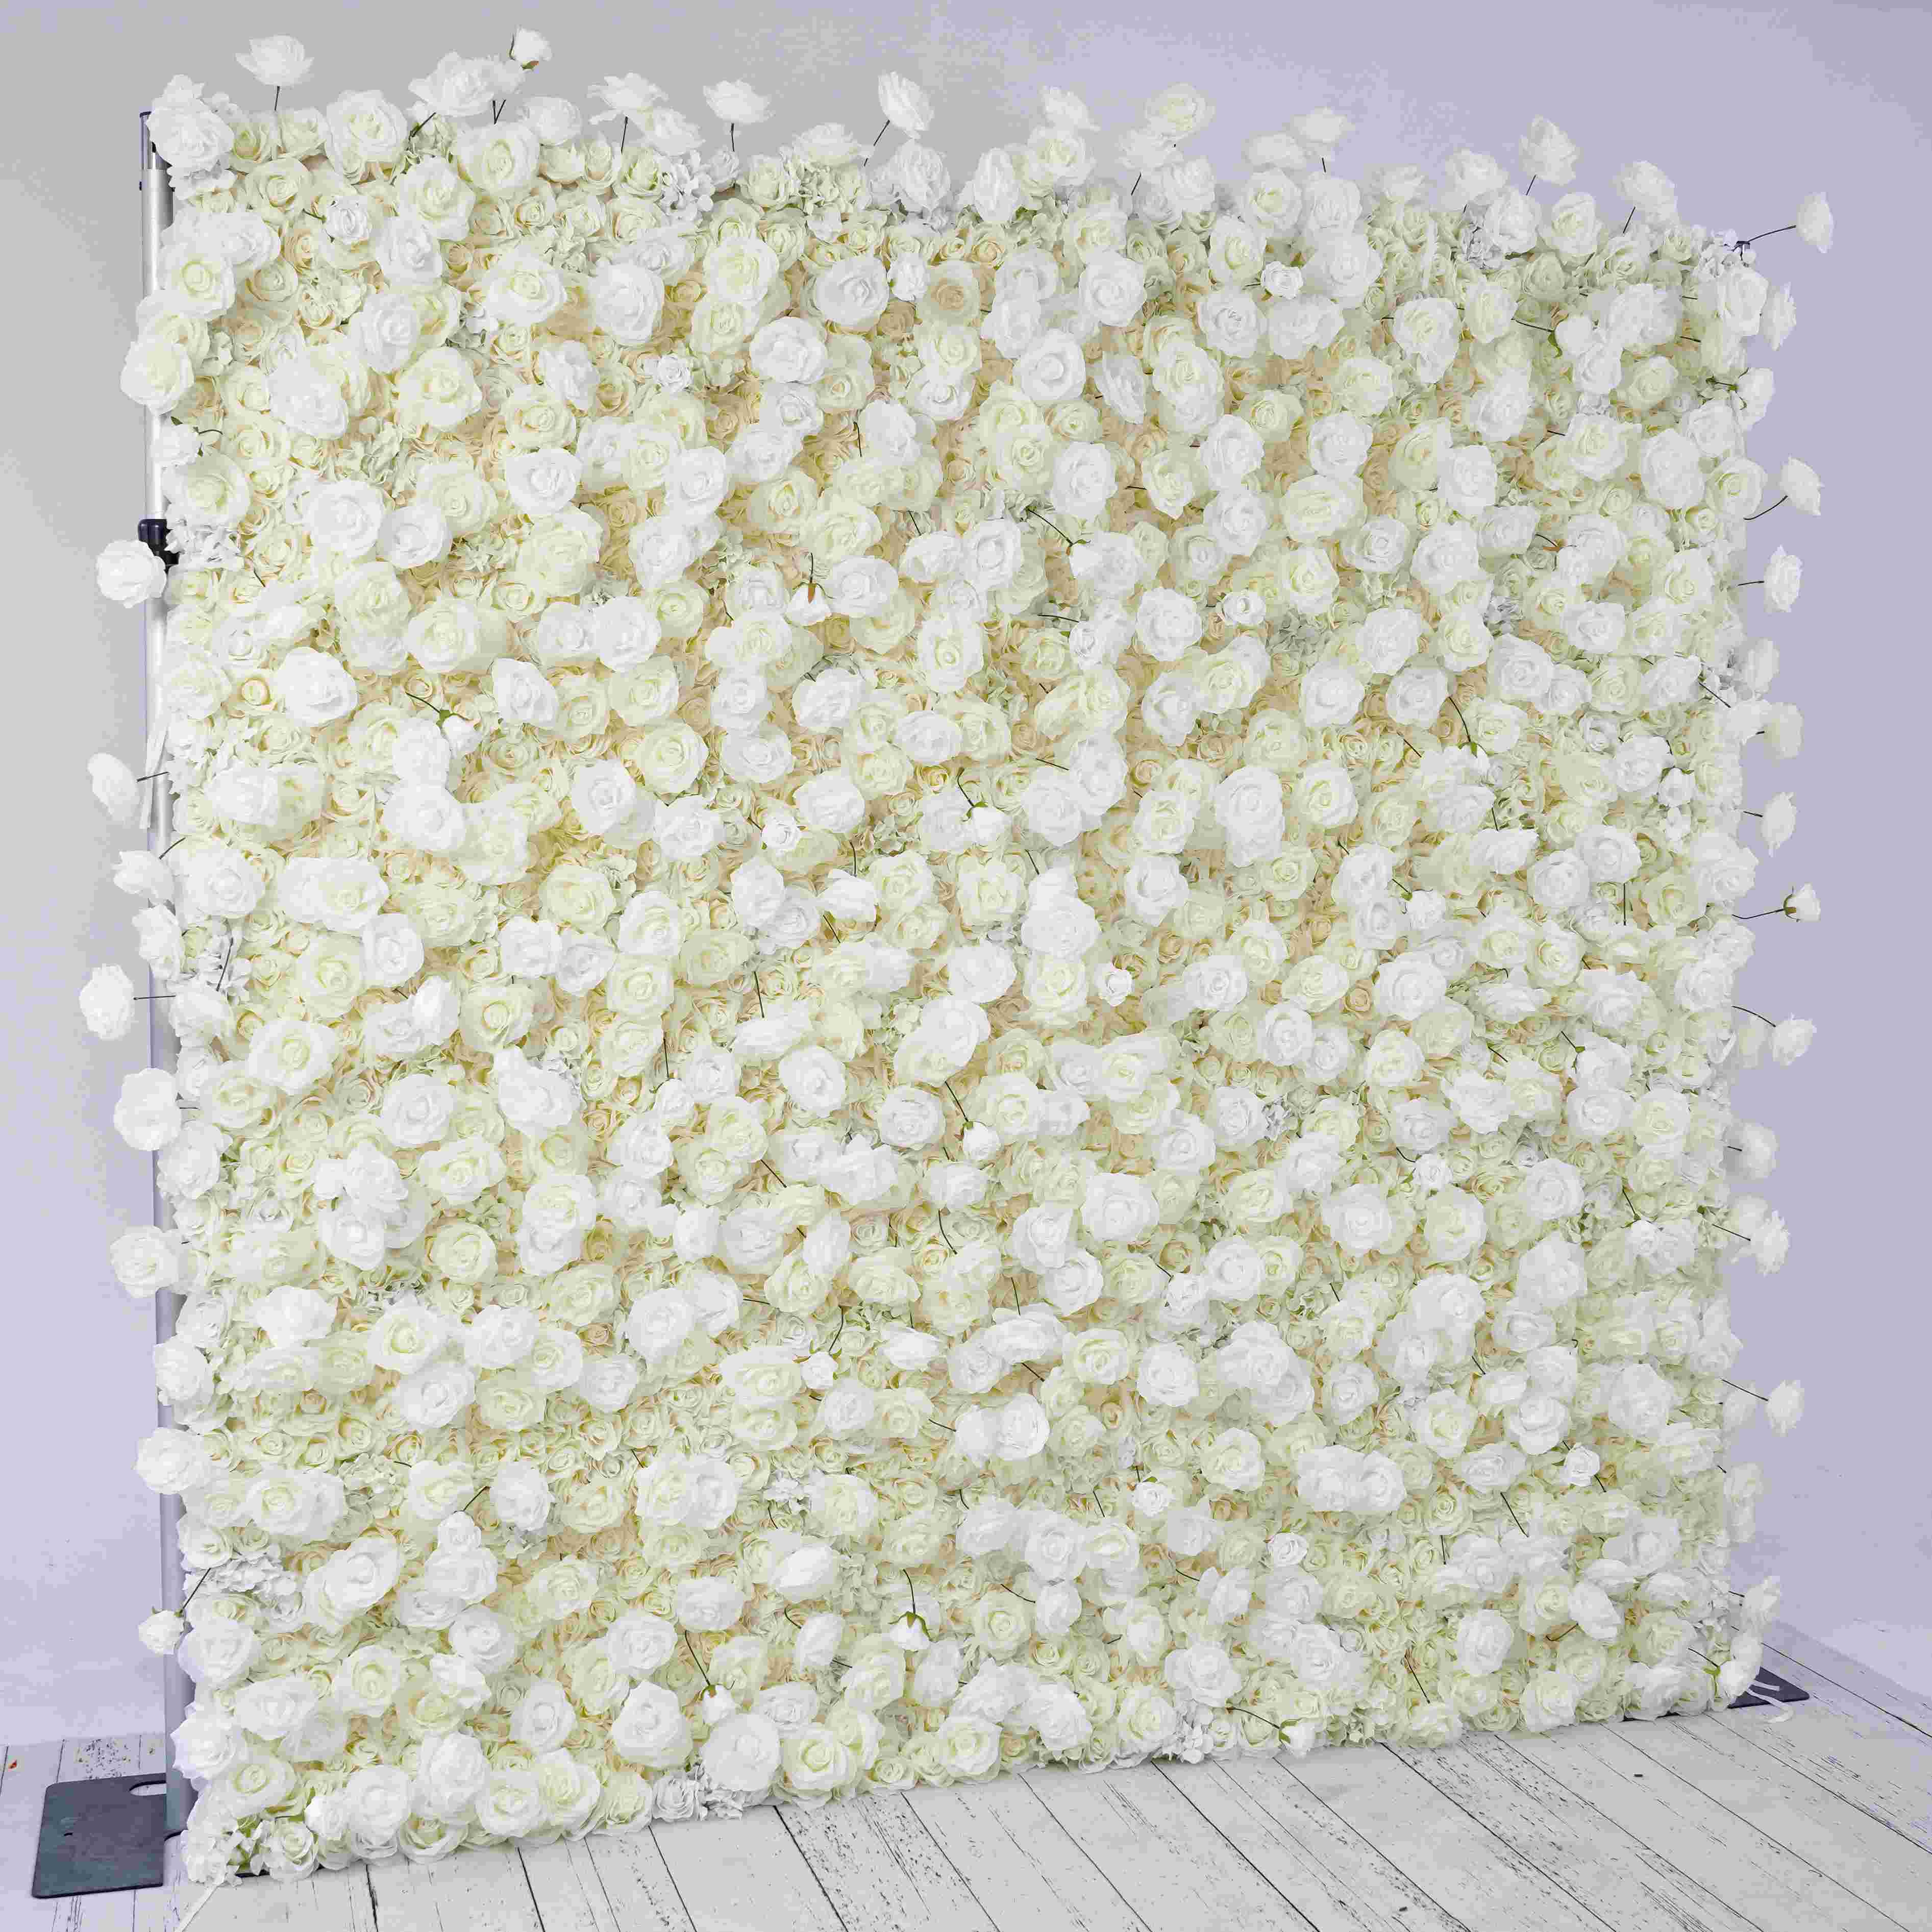 Flower Wall White and Cream White Roses Fabric Rolling Up Curtain Floral Backdrop Wedding Party Proposal Decor